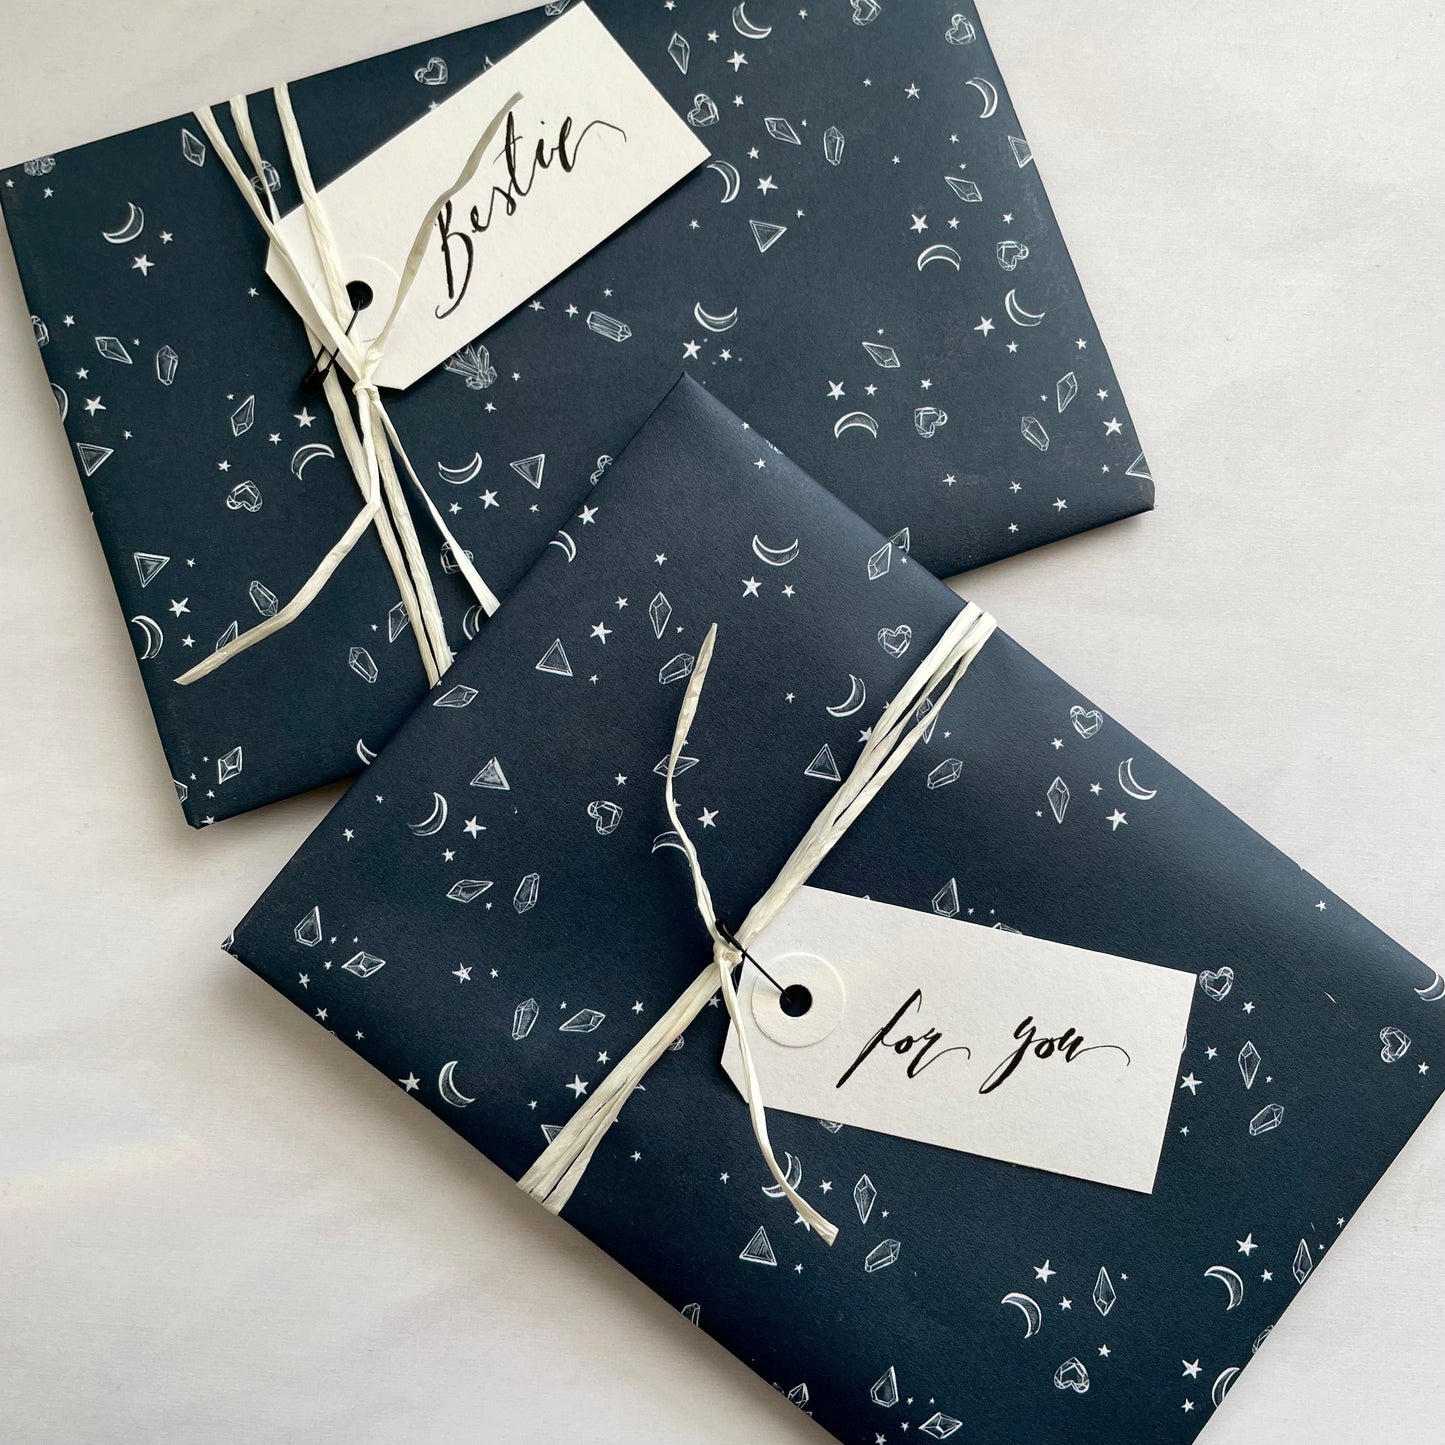 GIFT WRAP | Have me wrap your gift